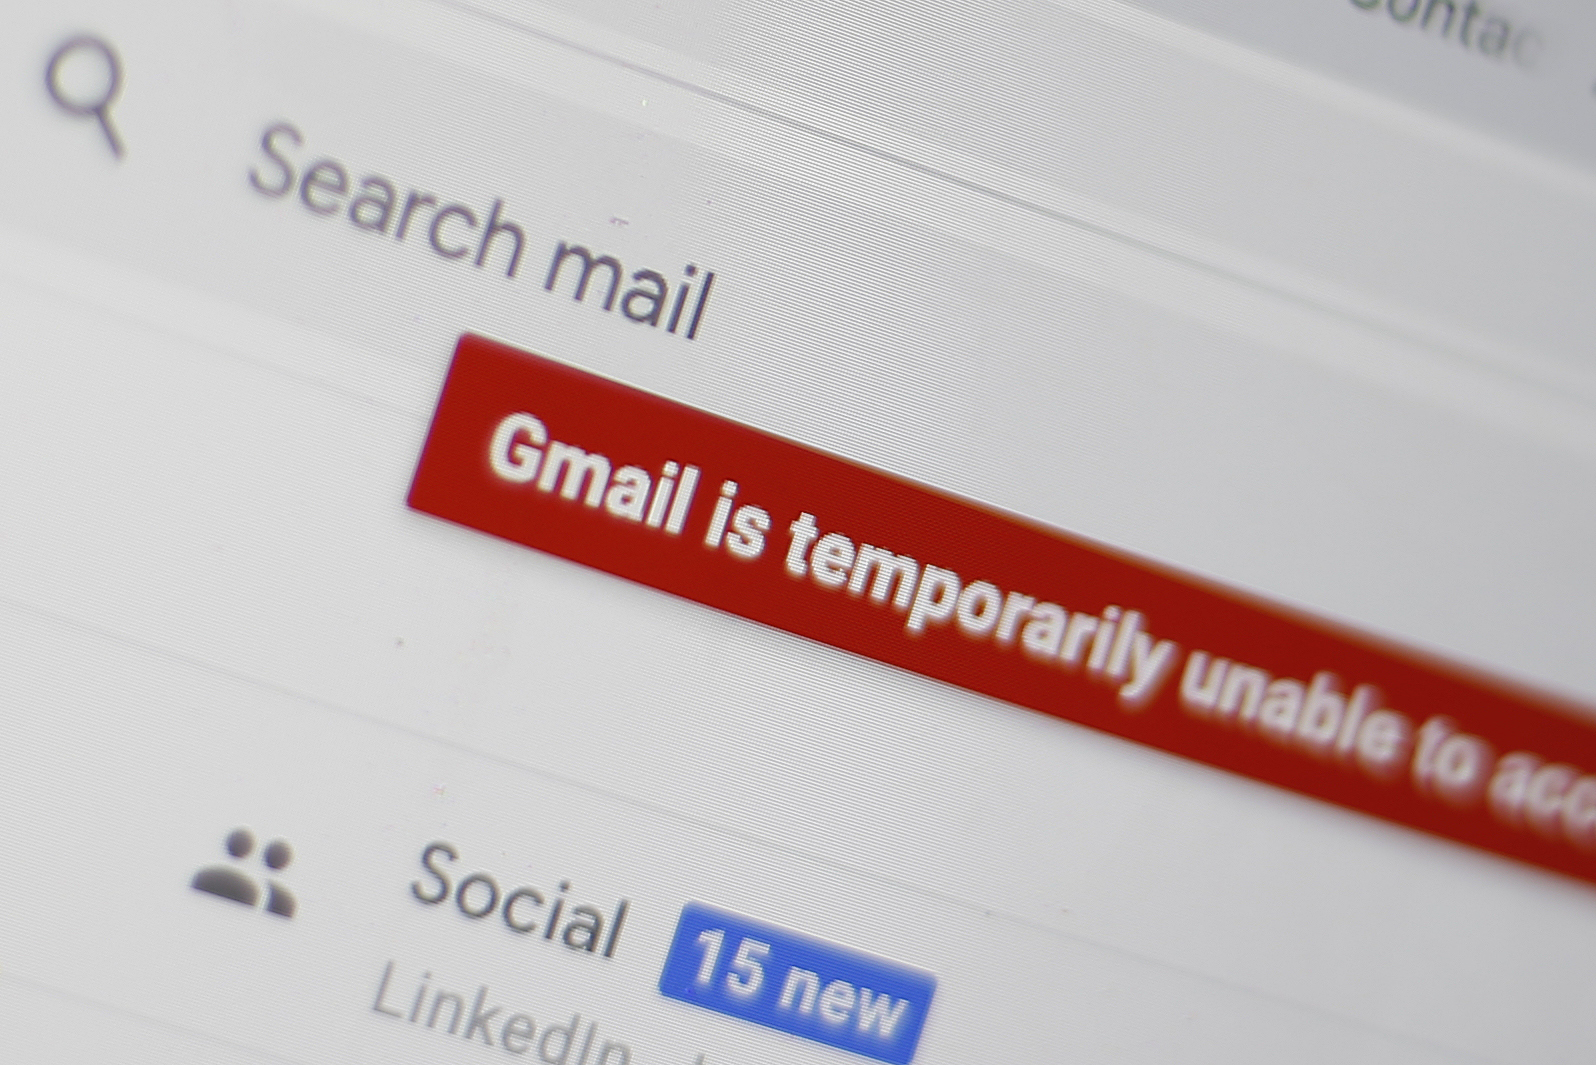 Gmail outage affects millions worldwide; Google acknowledges delays, says  fixing